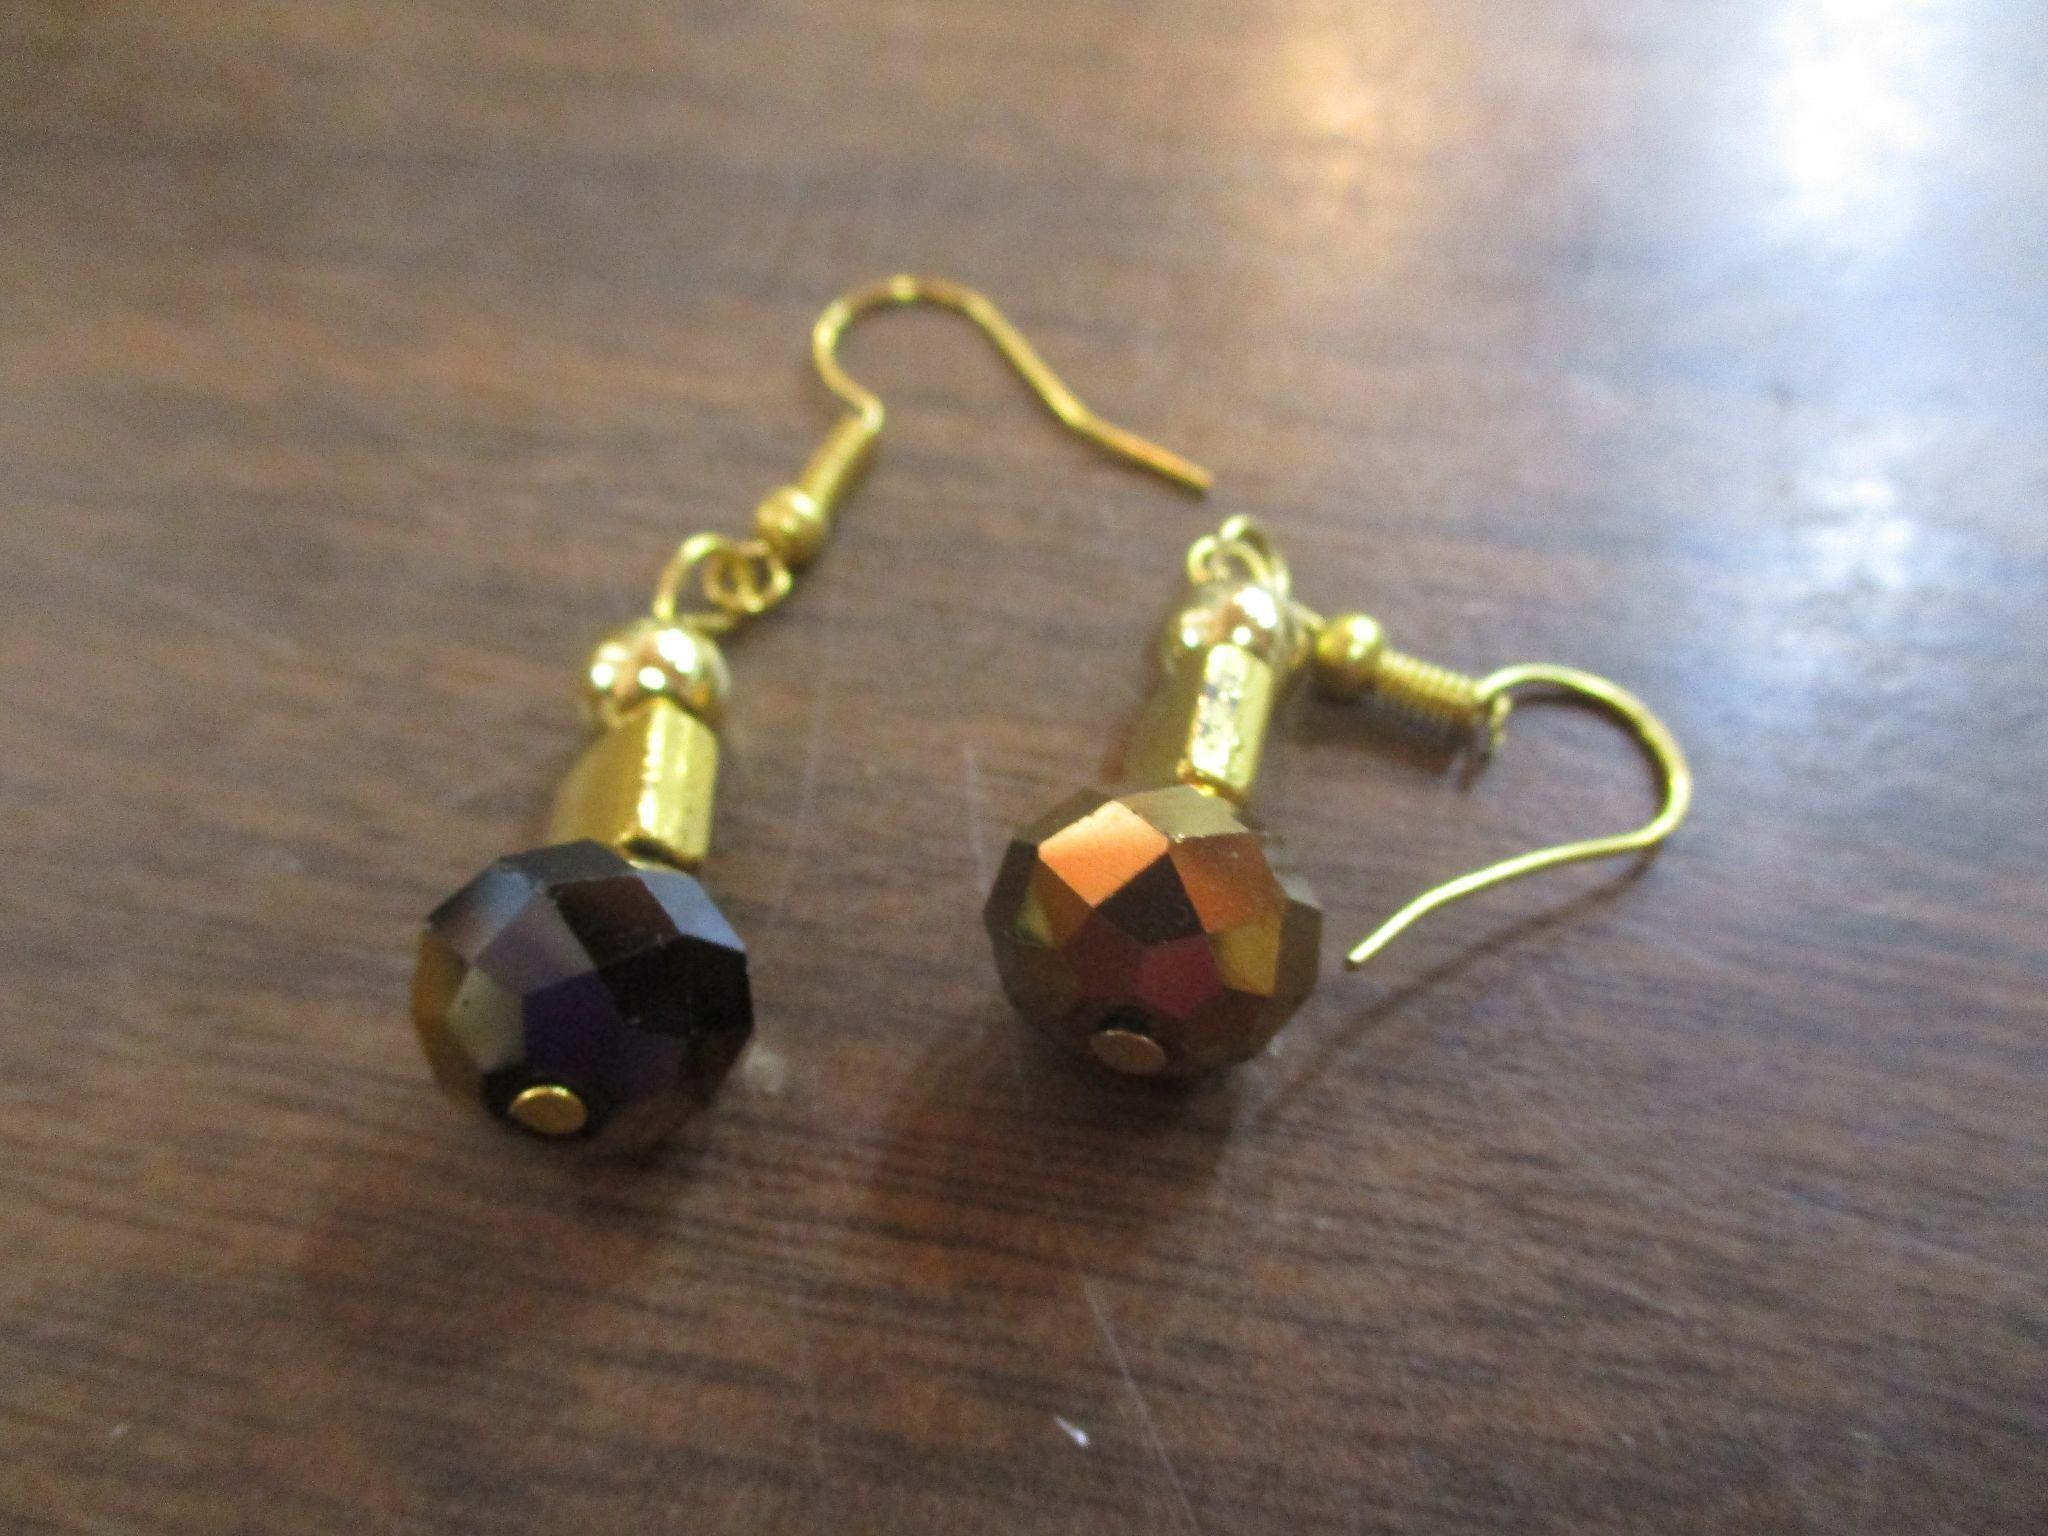 Earrings with Iridescent Beads